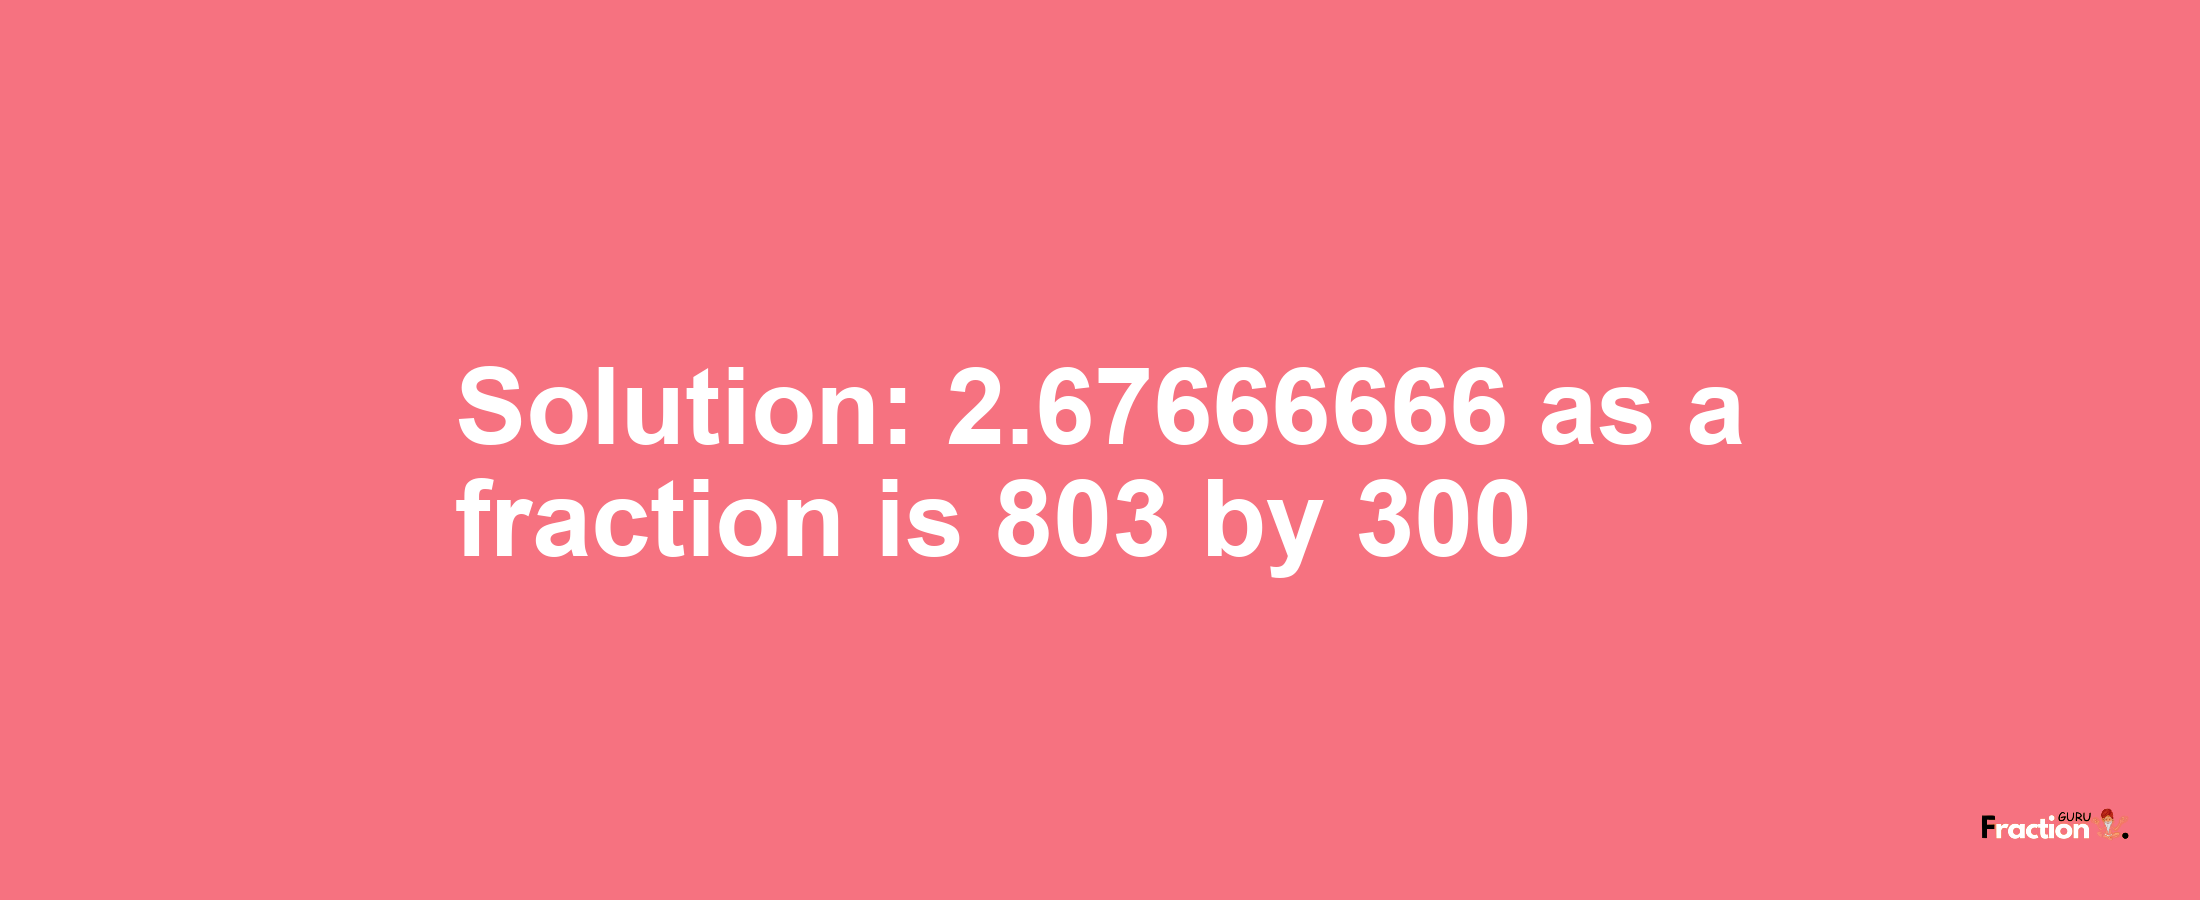 Solution:2.67666666 as a fraction is 803/300